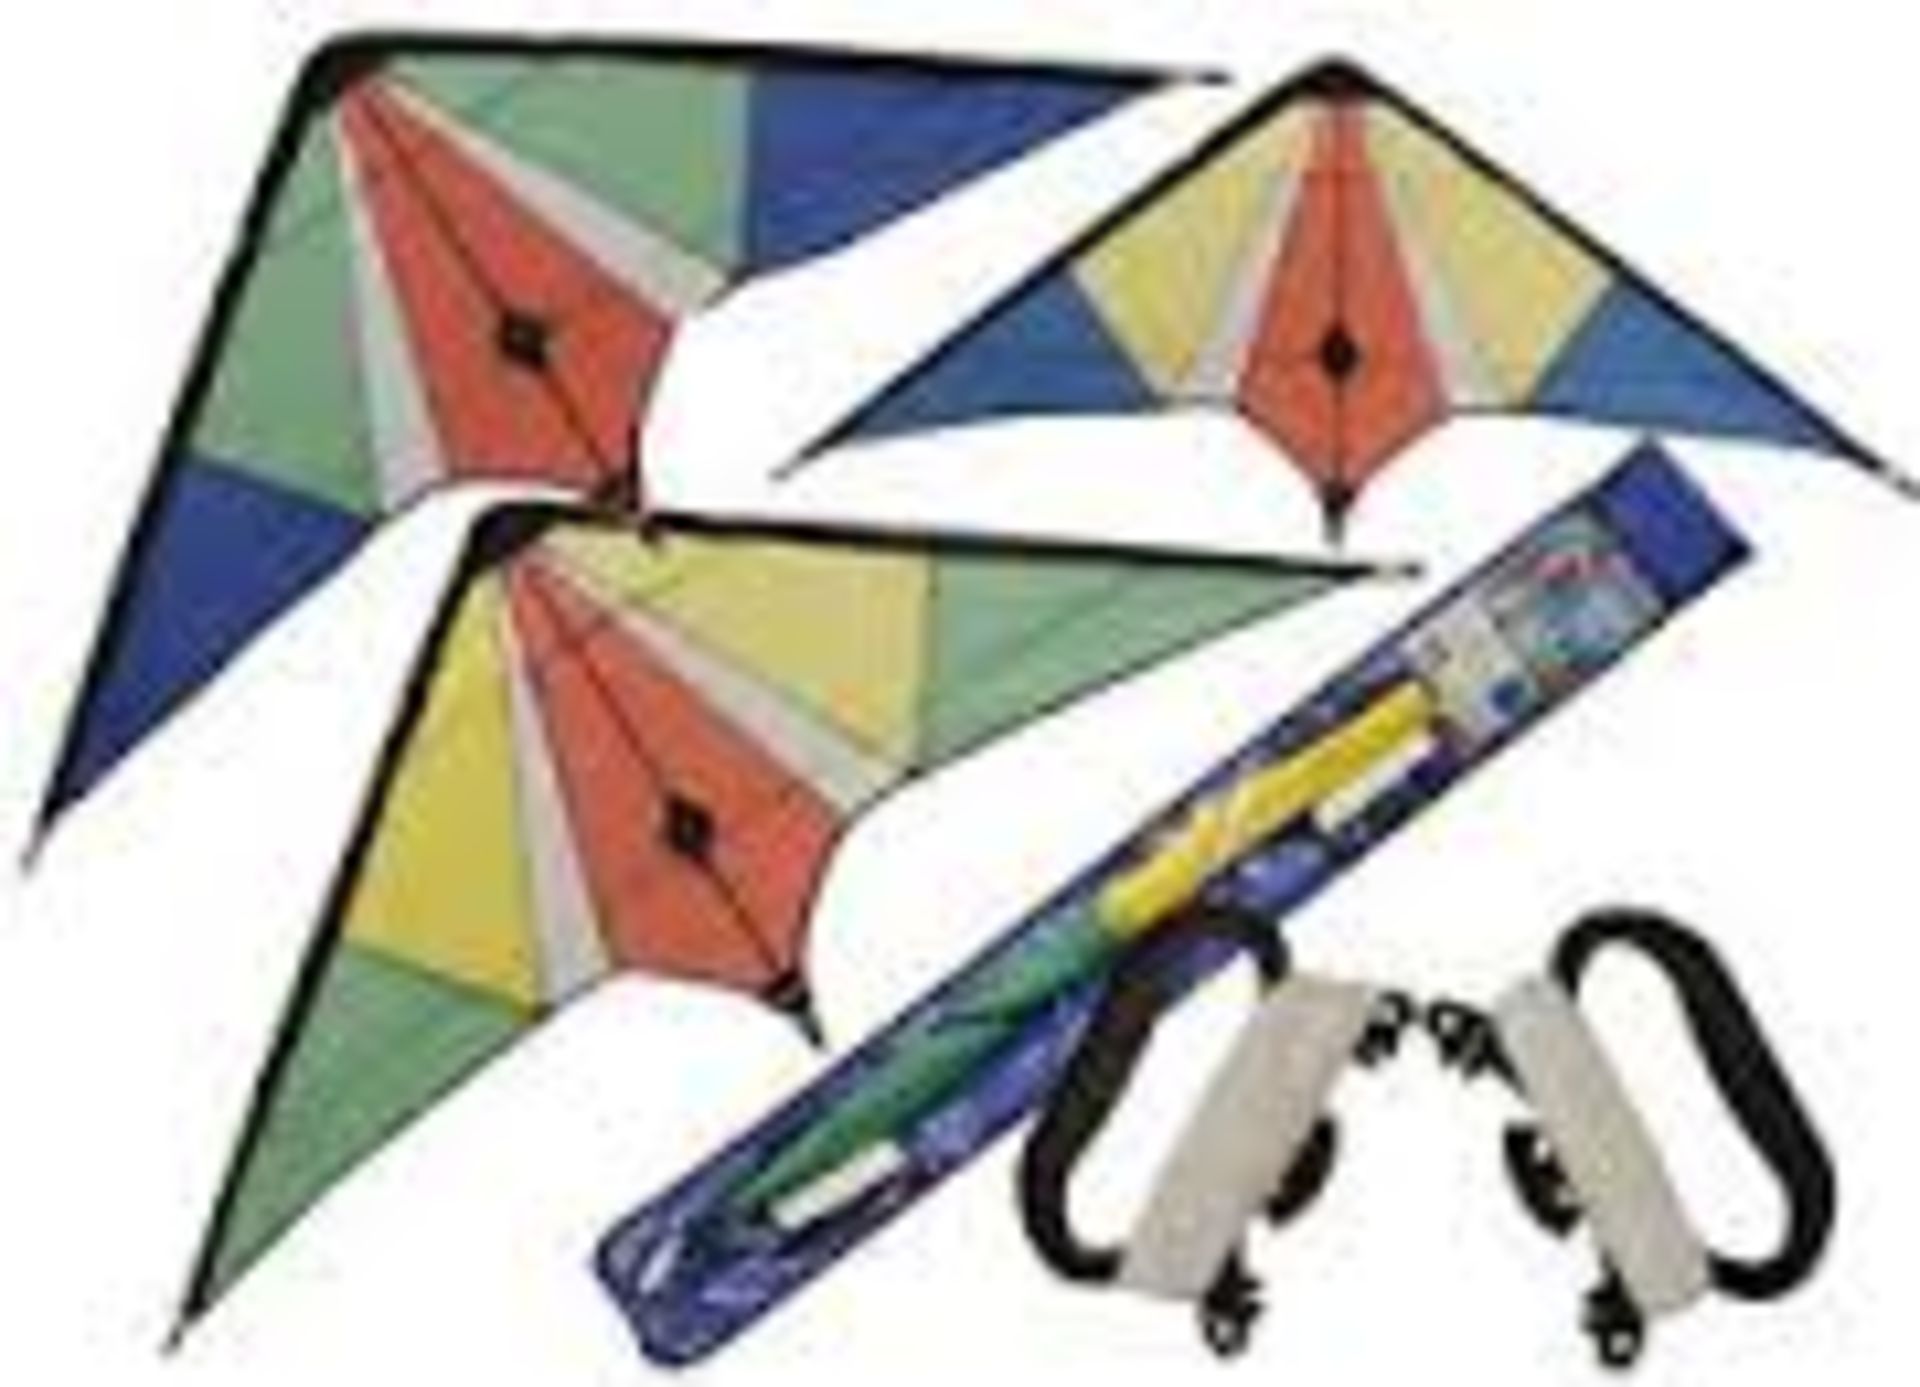 V Brand New Nylon Colourful Delta Kite X 2 YOUR BID PRICE TO BE MULTIPLIED BY TWO